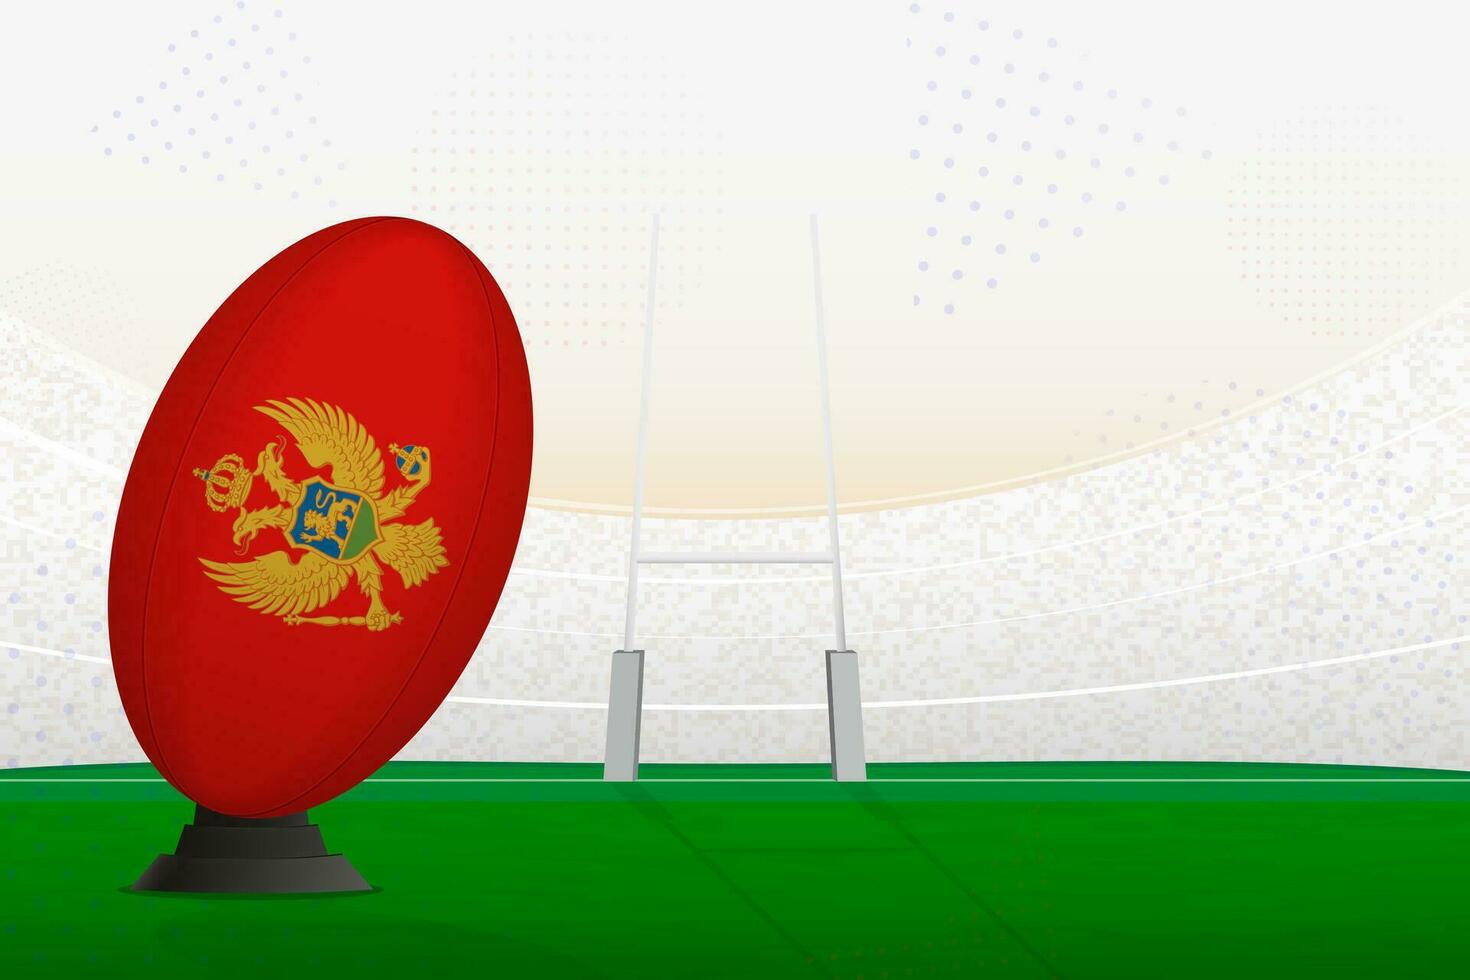 Montenegro national team rugby ball on rugby stadium and goal posts, preparing for a penalty or free kick. vector